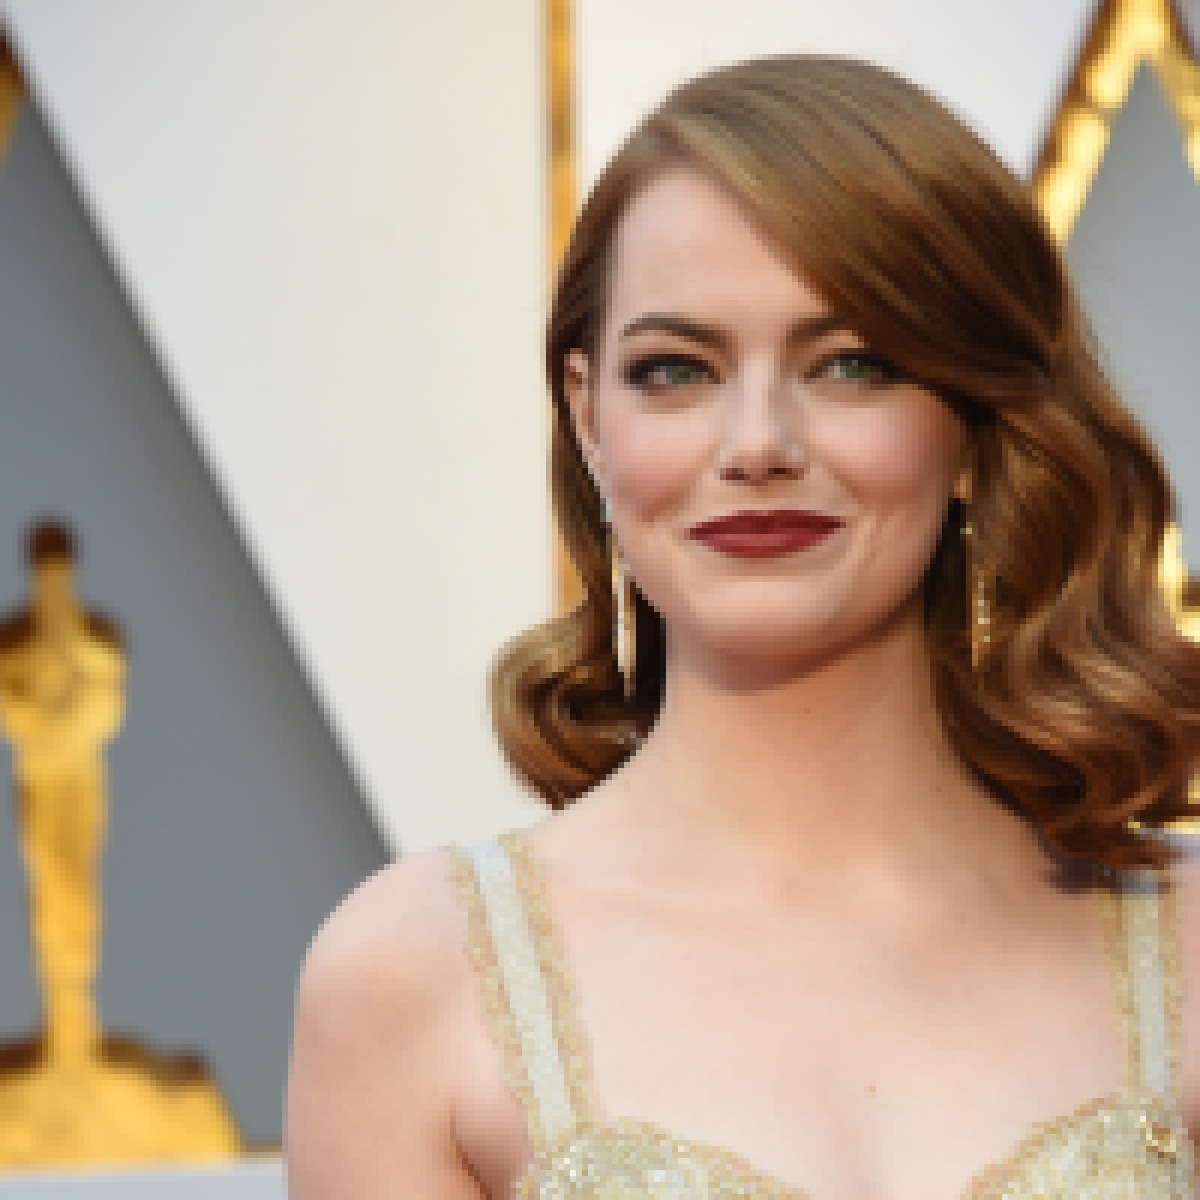 Here's the yet-to-be-released product that gave Emma Stone her Oscar-winning flush